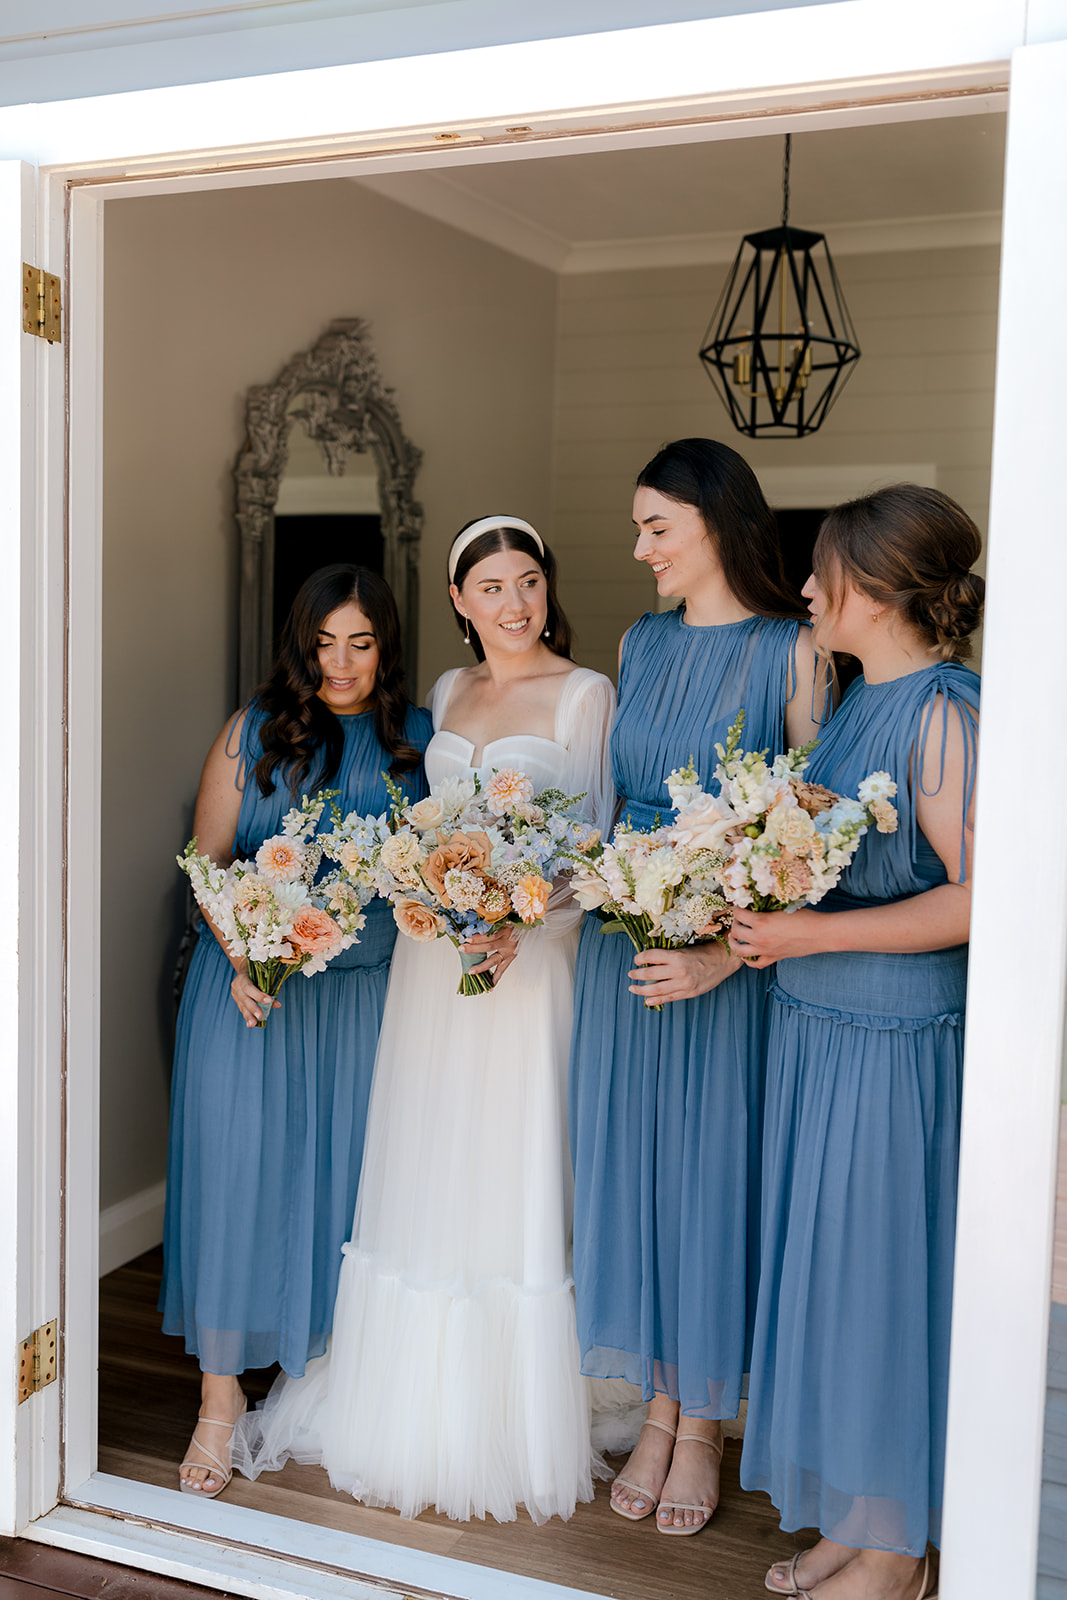 Bride with her bridesmaids holding their bridal bouquets before her elegant country wedding.